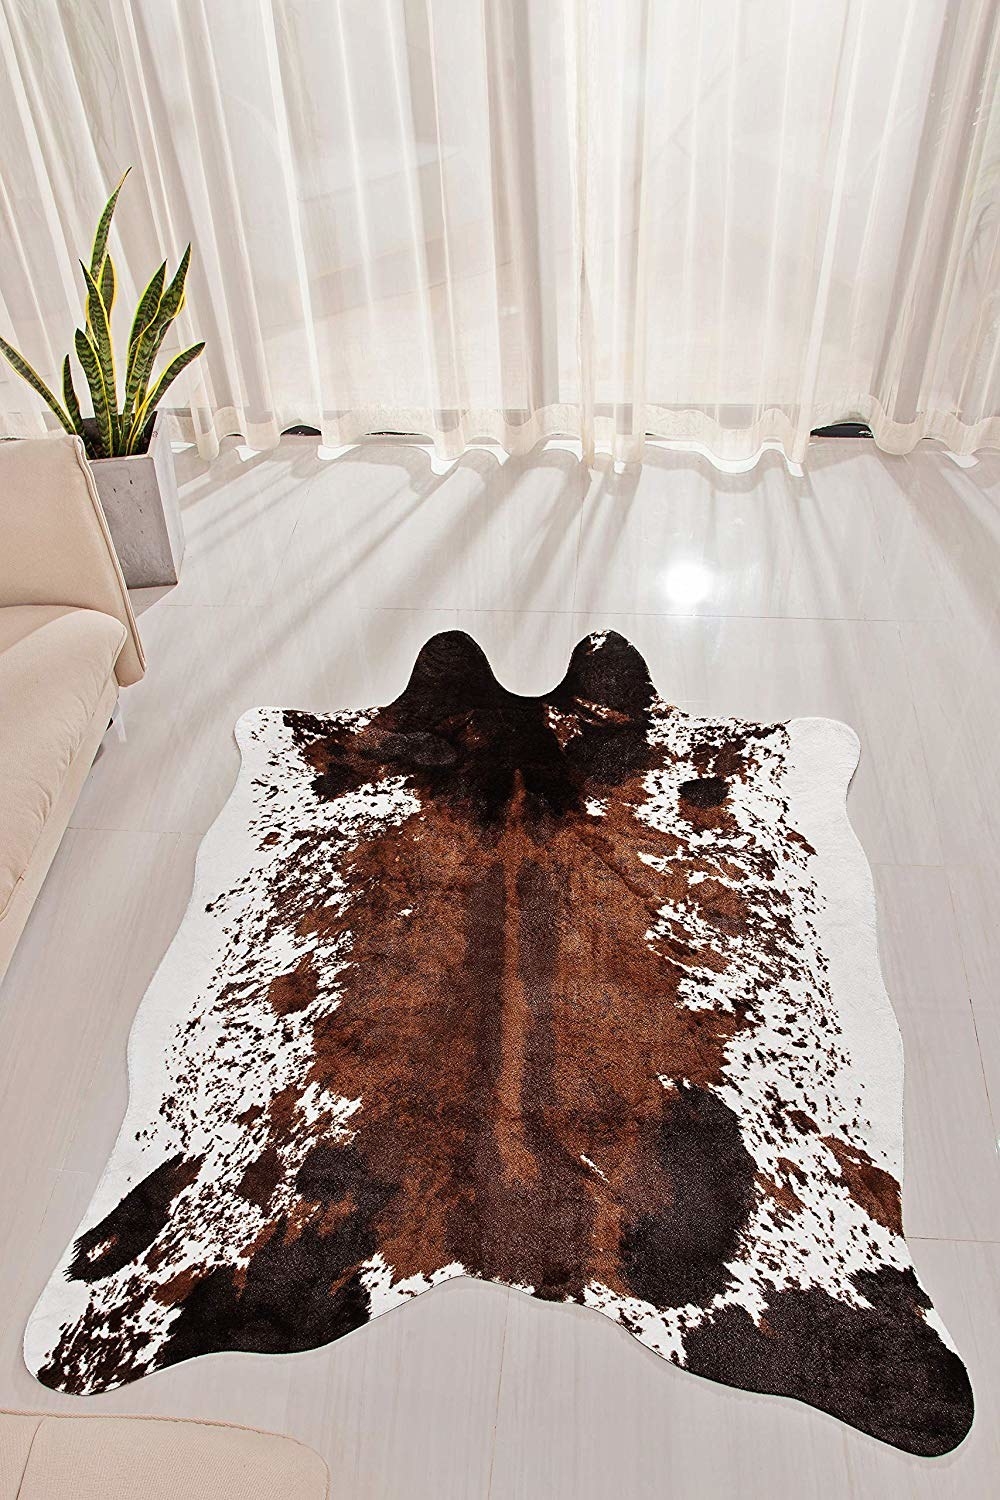 Cowhide rug in white, brown, and tan 